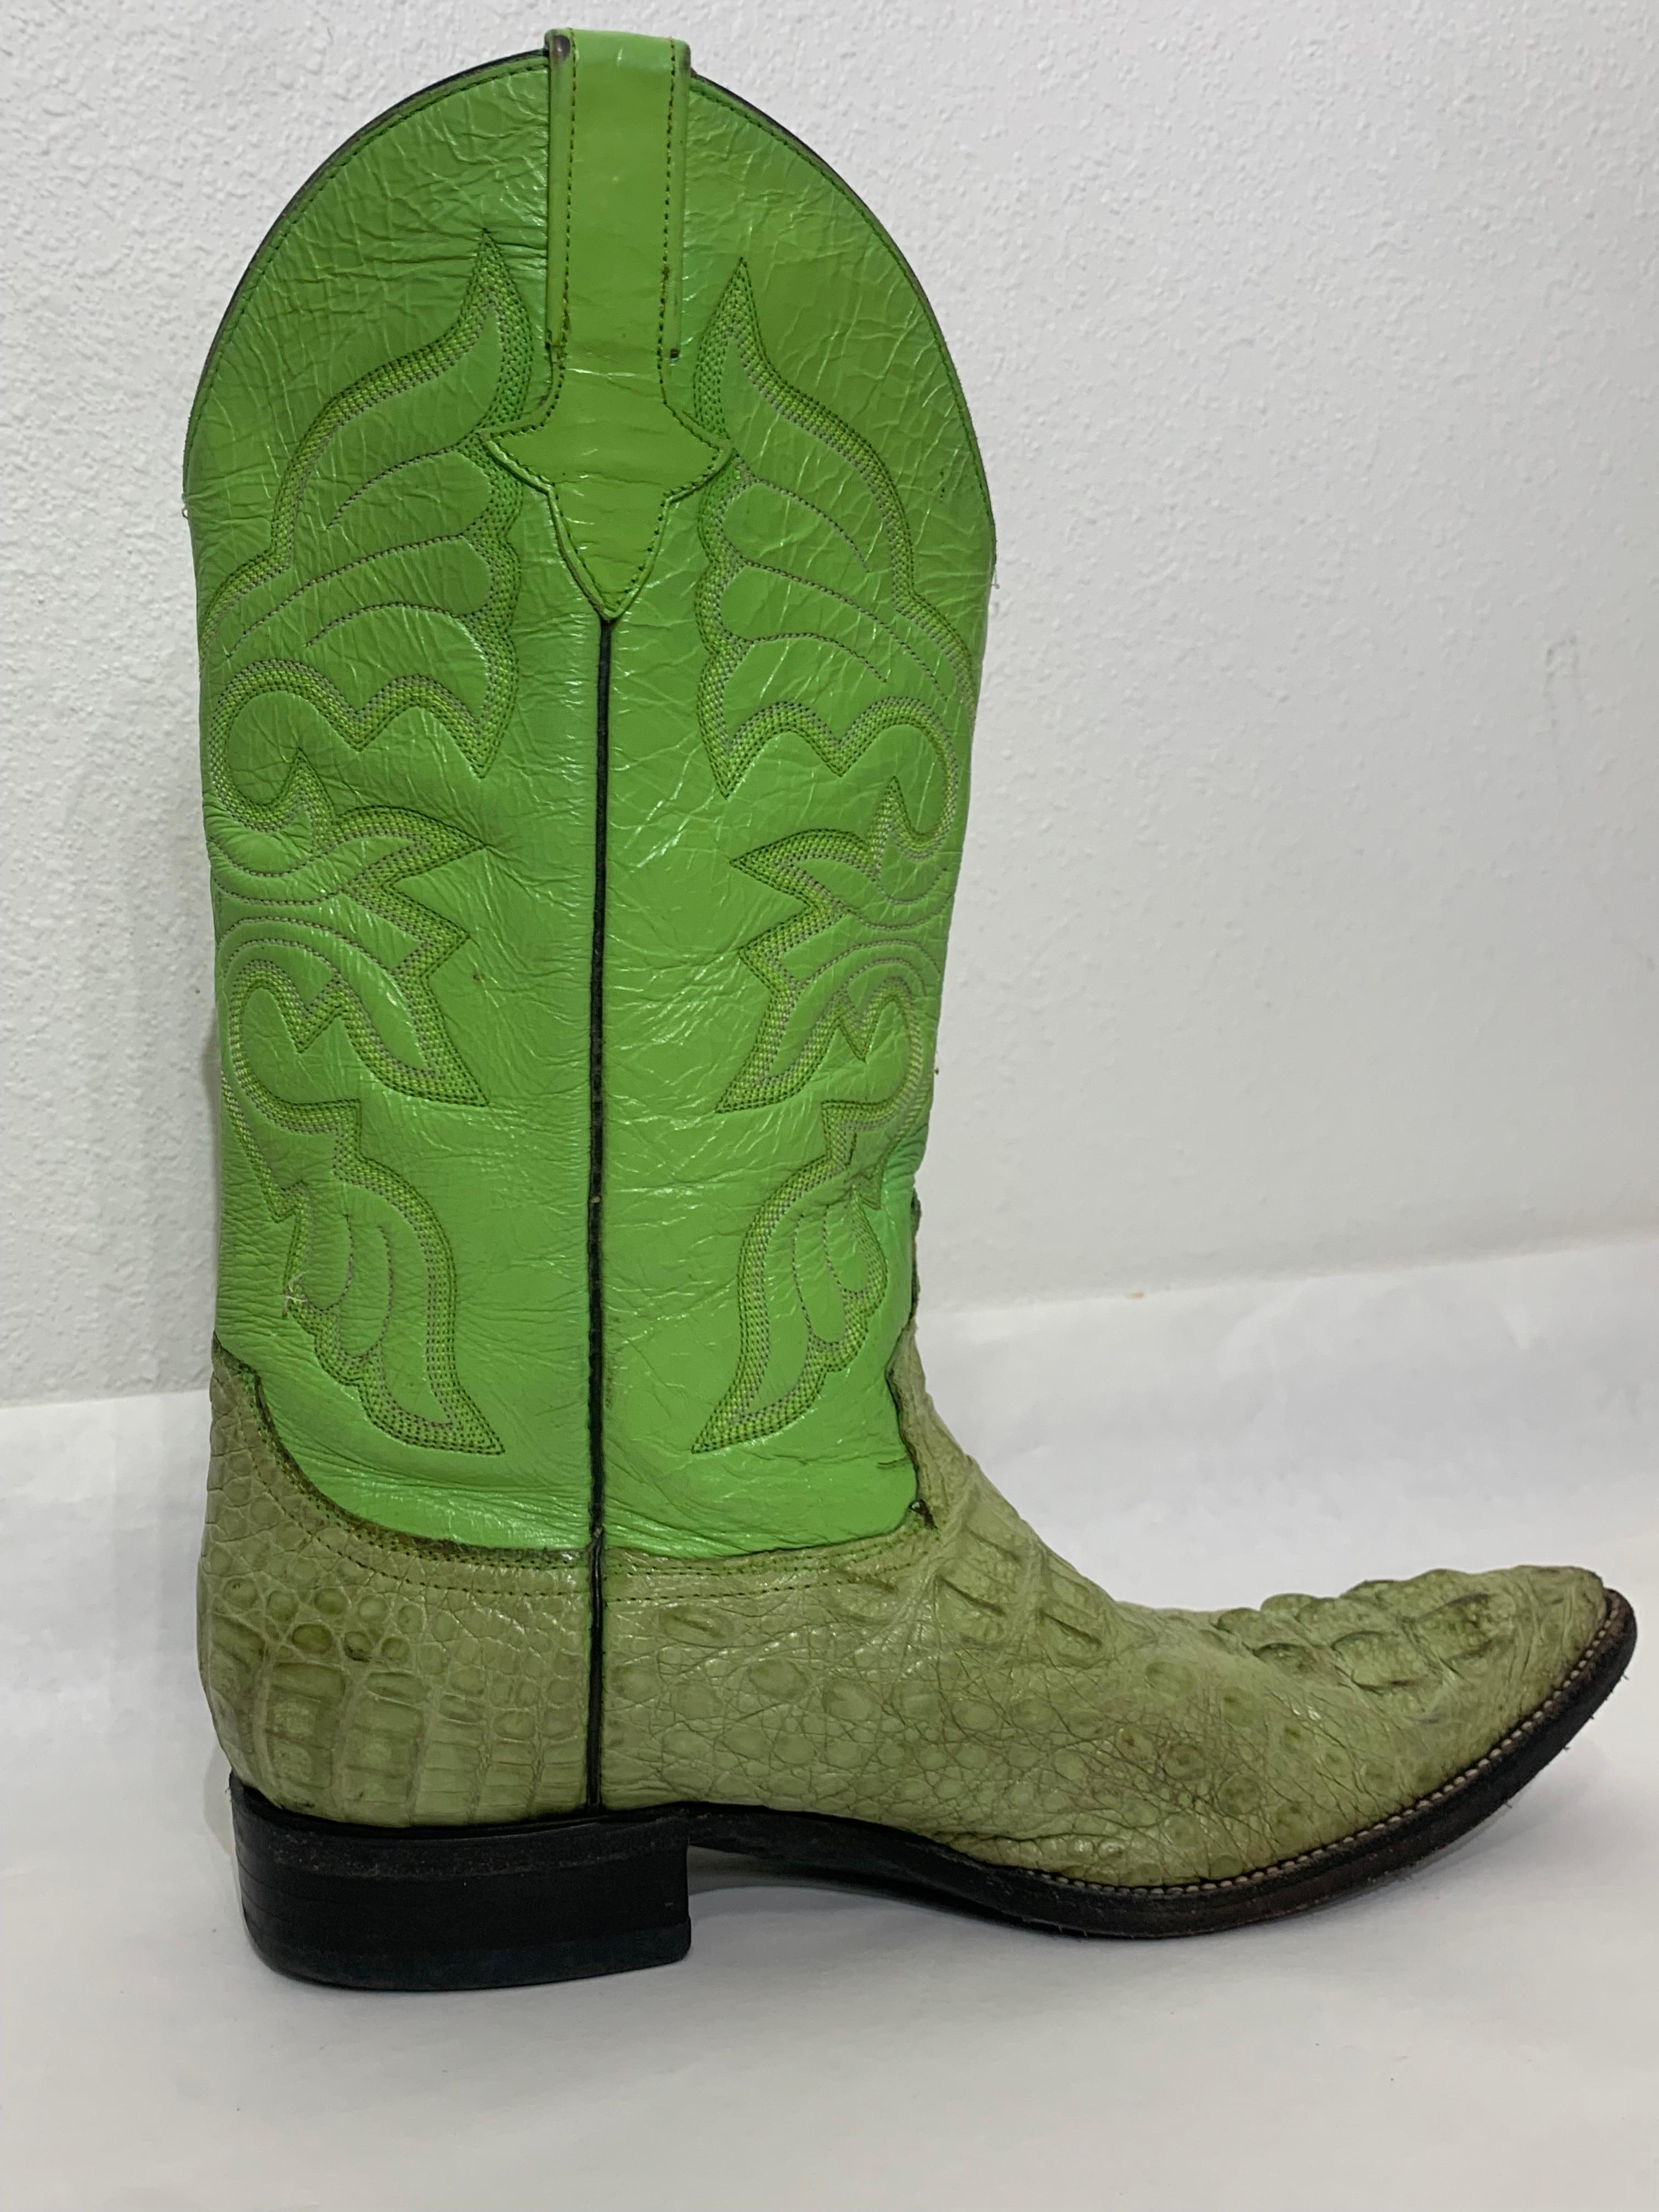 Gecko Green Leather & Crocodile Western Cowboy Boots US Size 8 For Sale 7